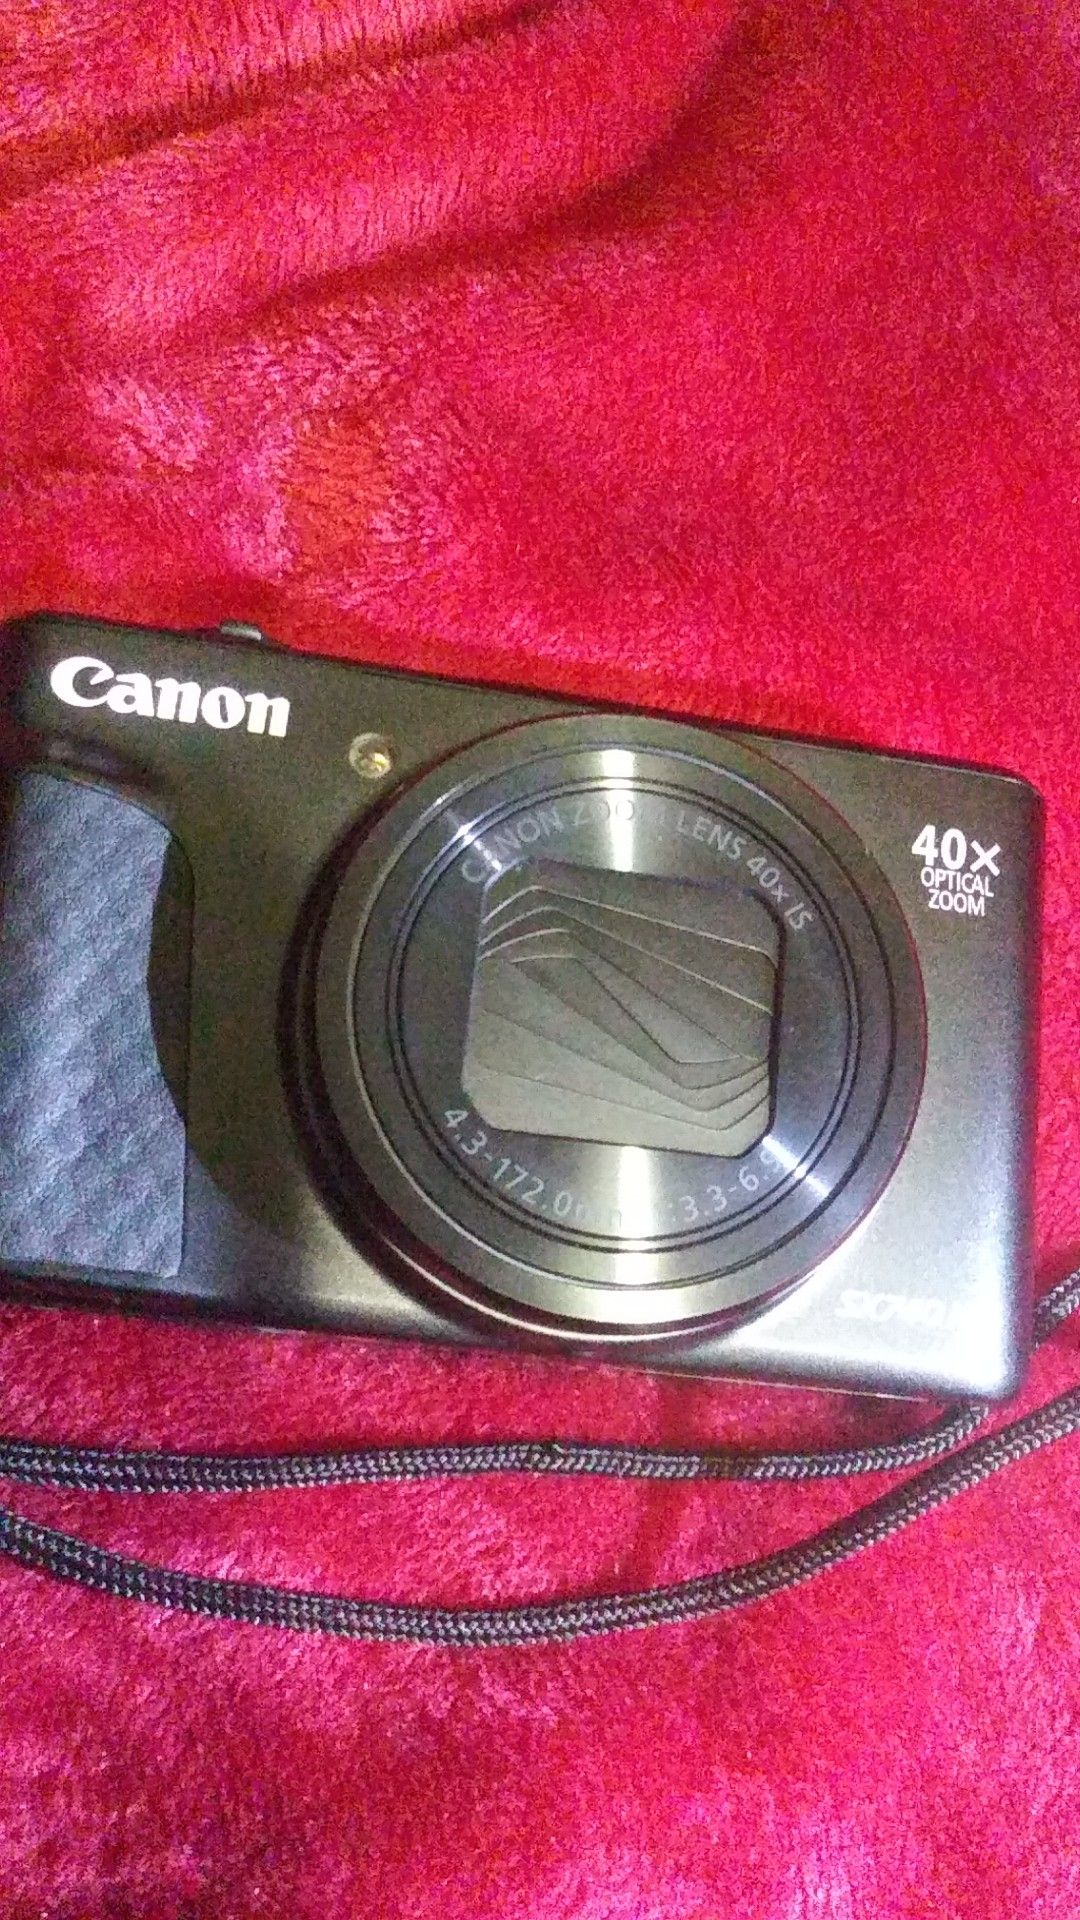 Canon PowerShot SX740HS / 4K/ Wi-Fi/Bluetooth enabled